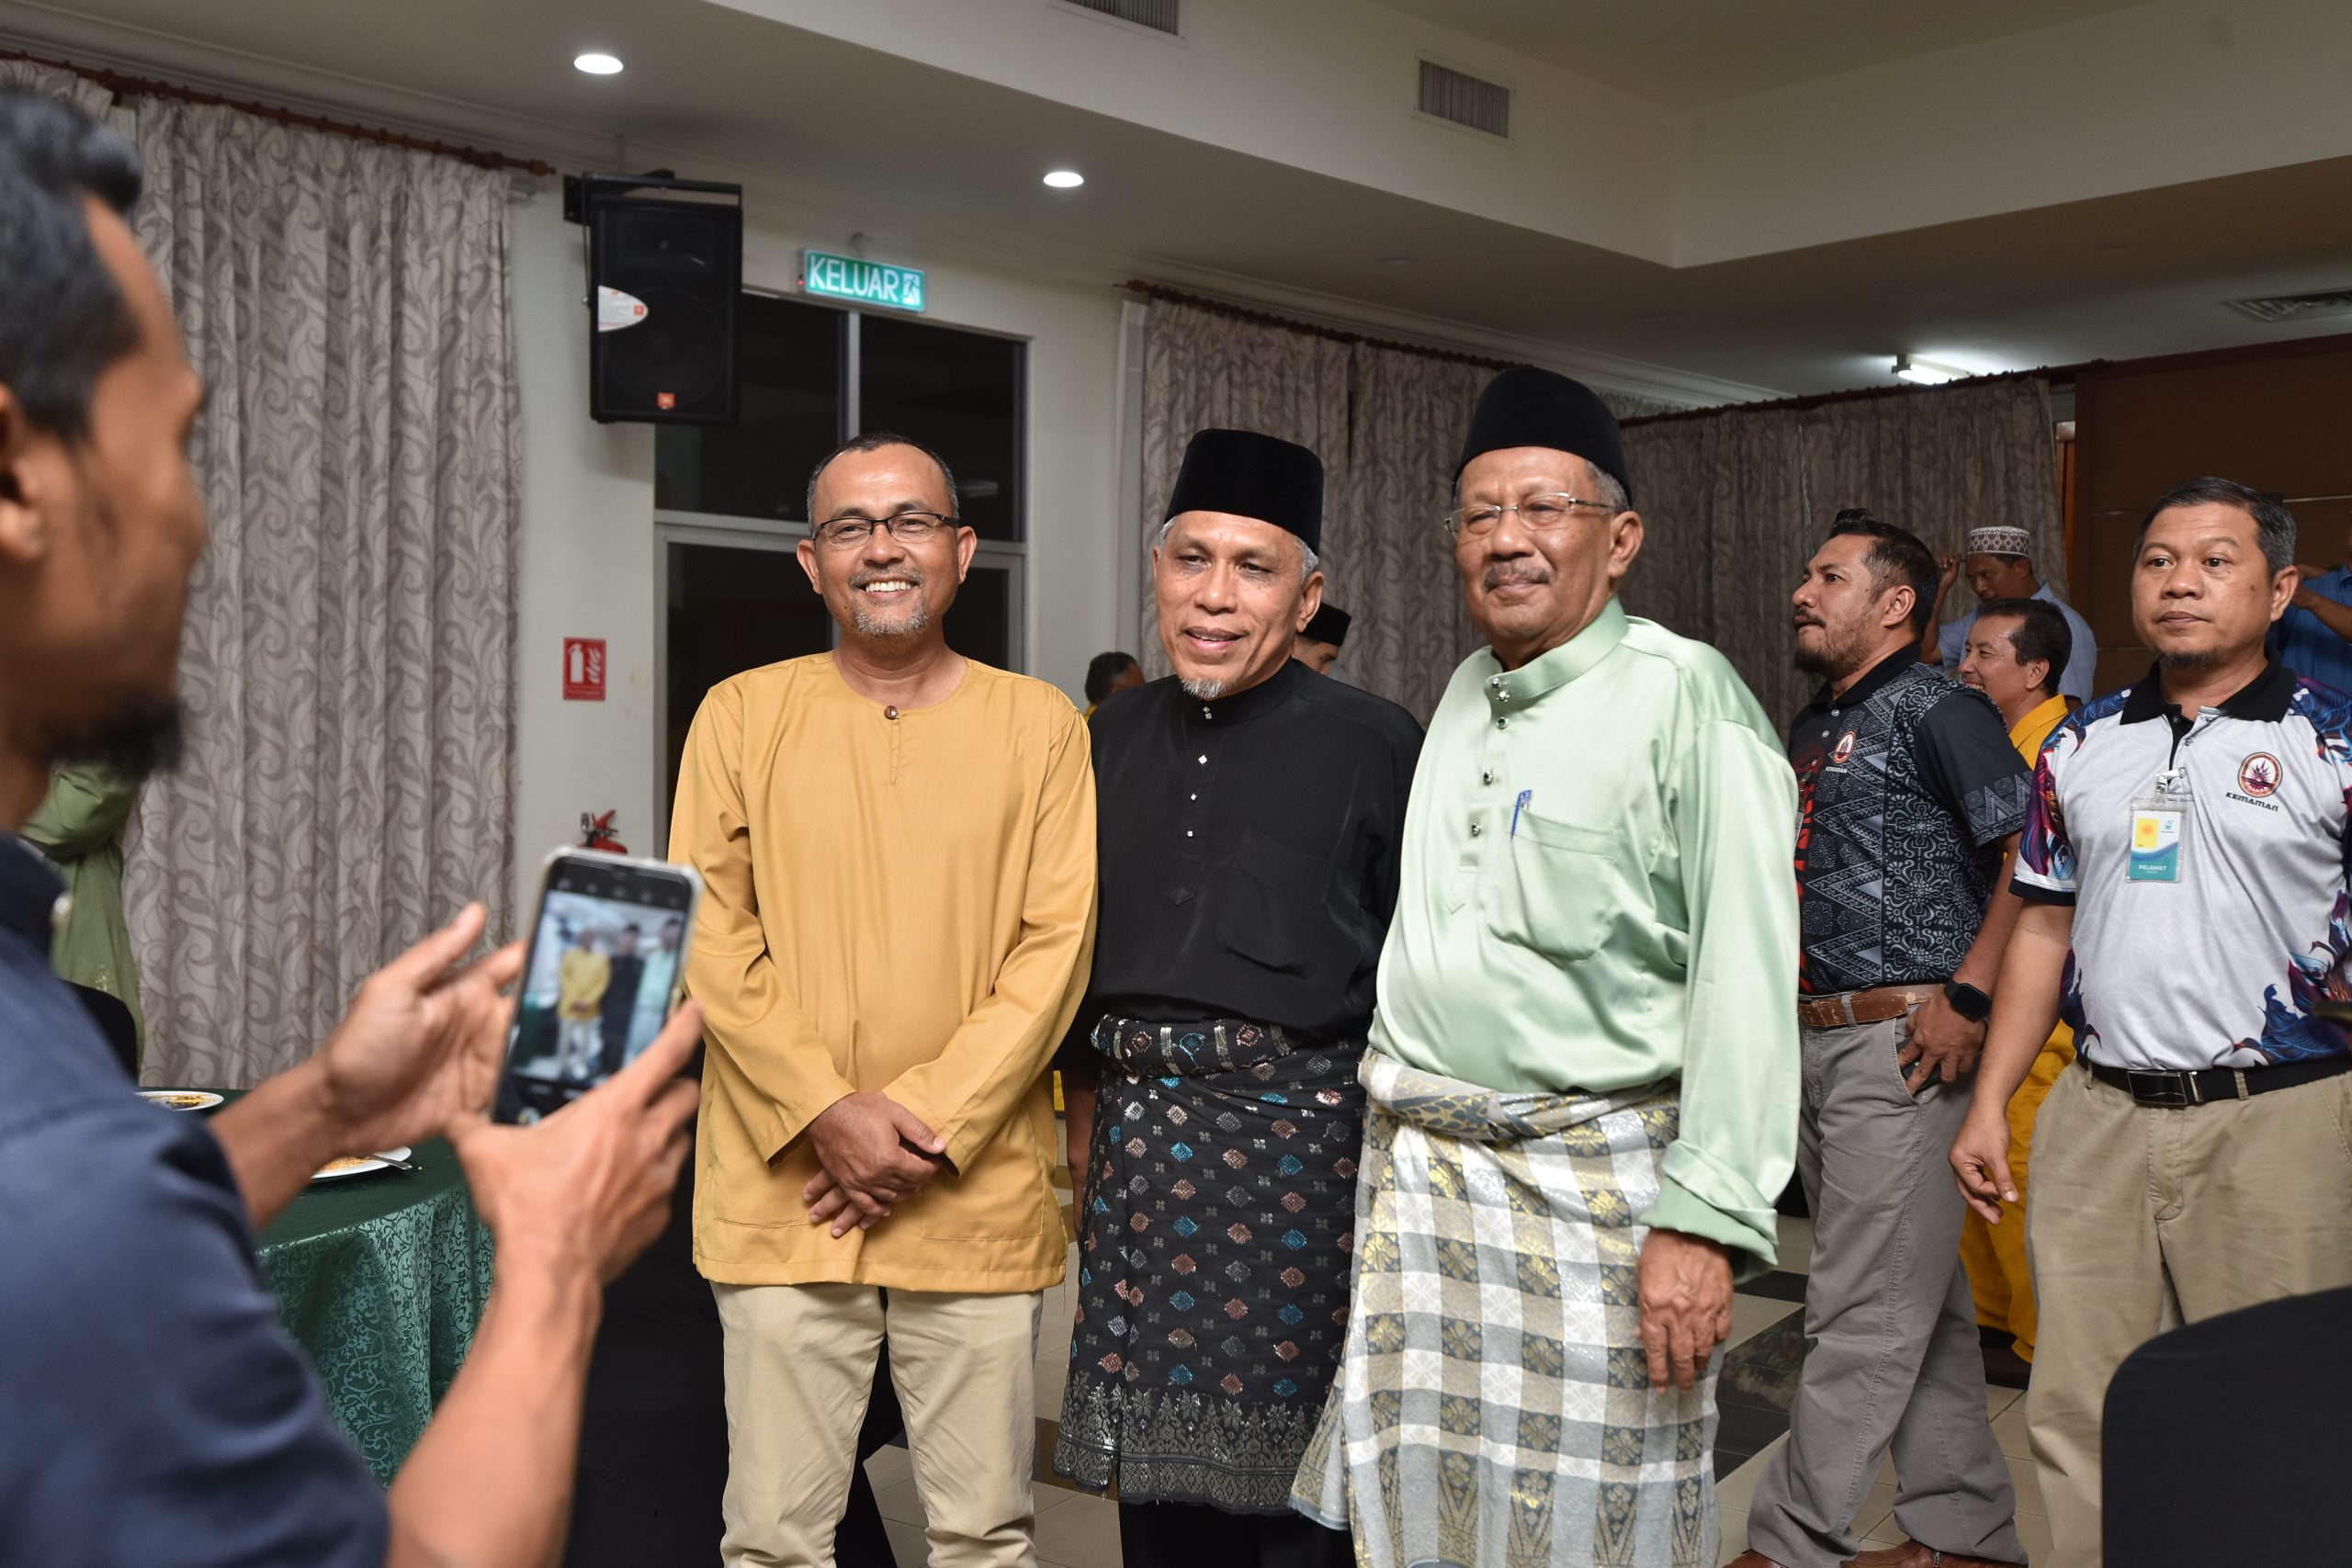 The event served as a platform for the attendees to bond during raya.